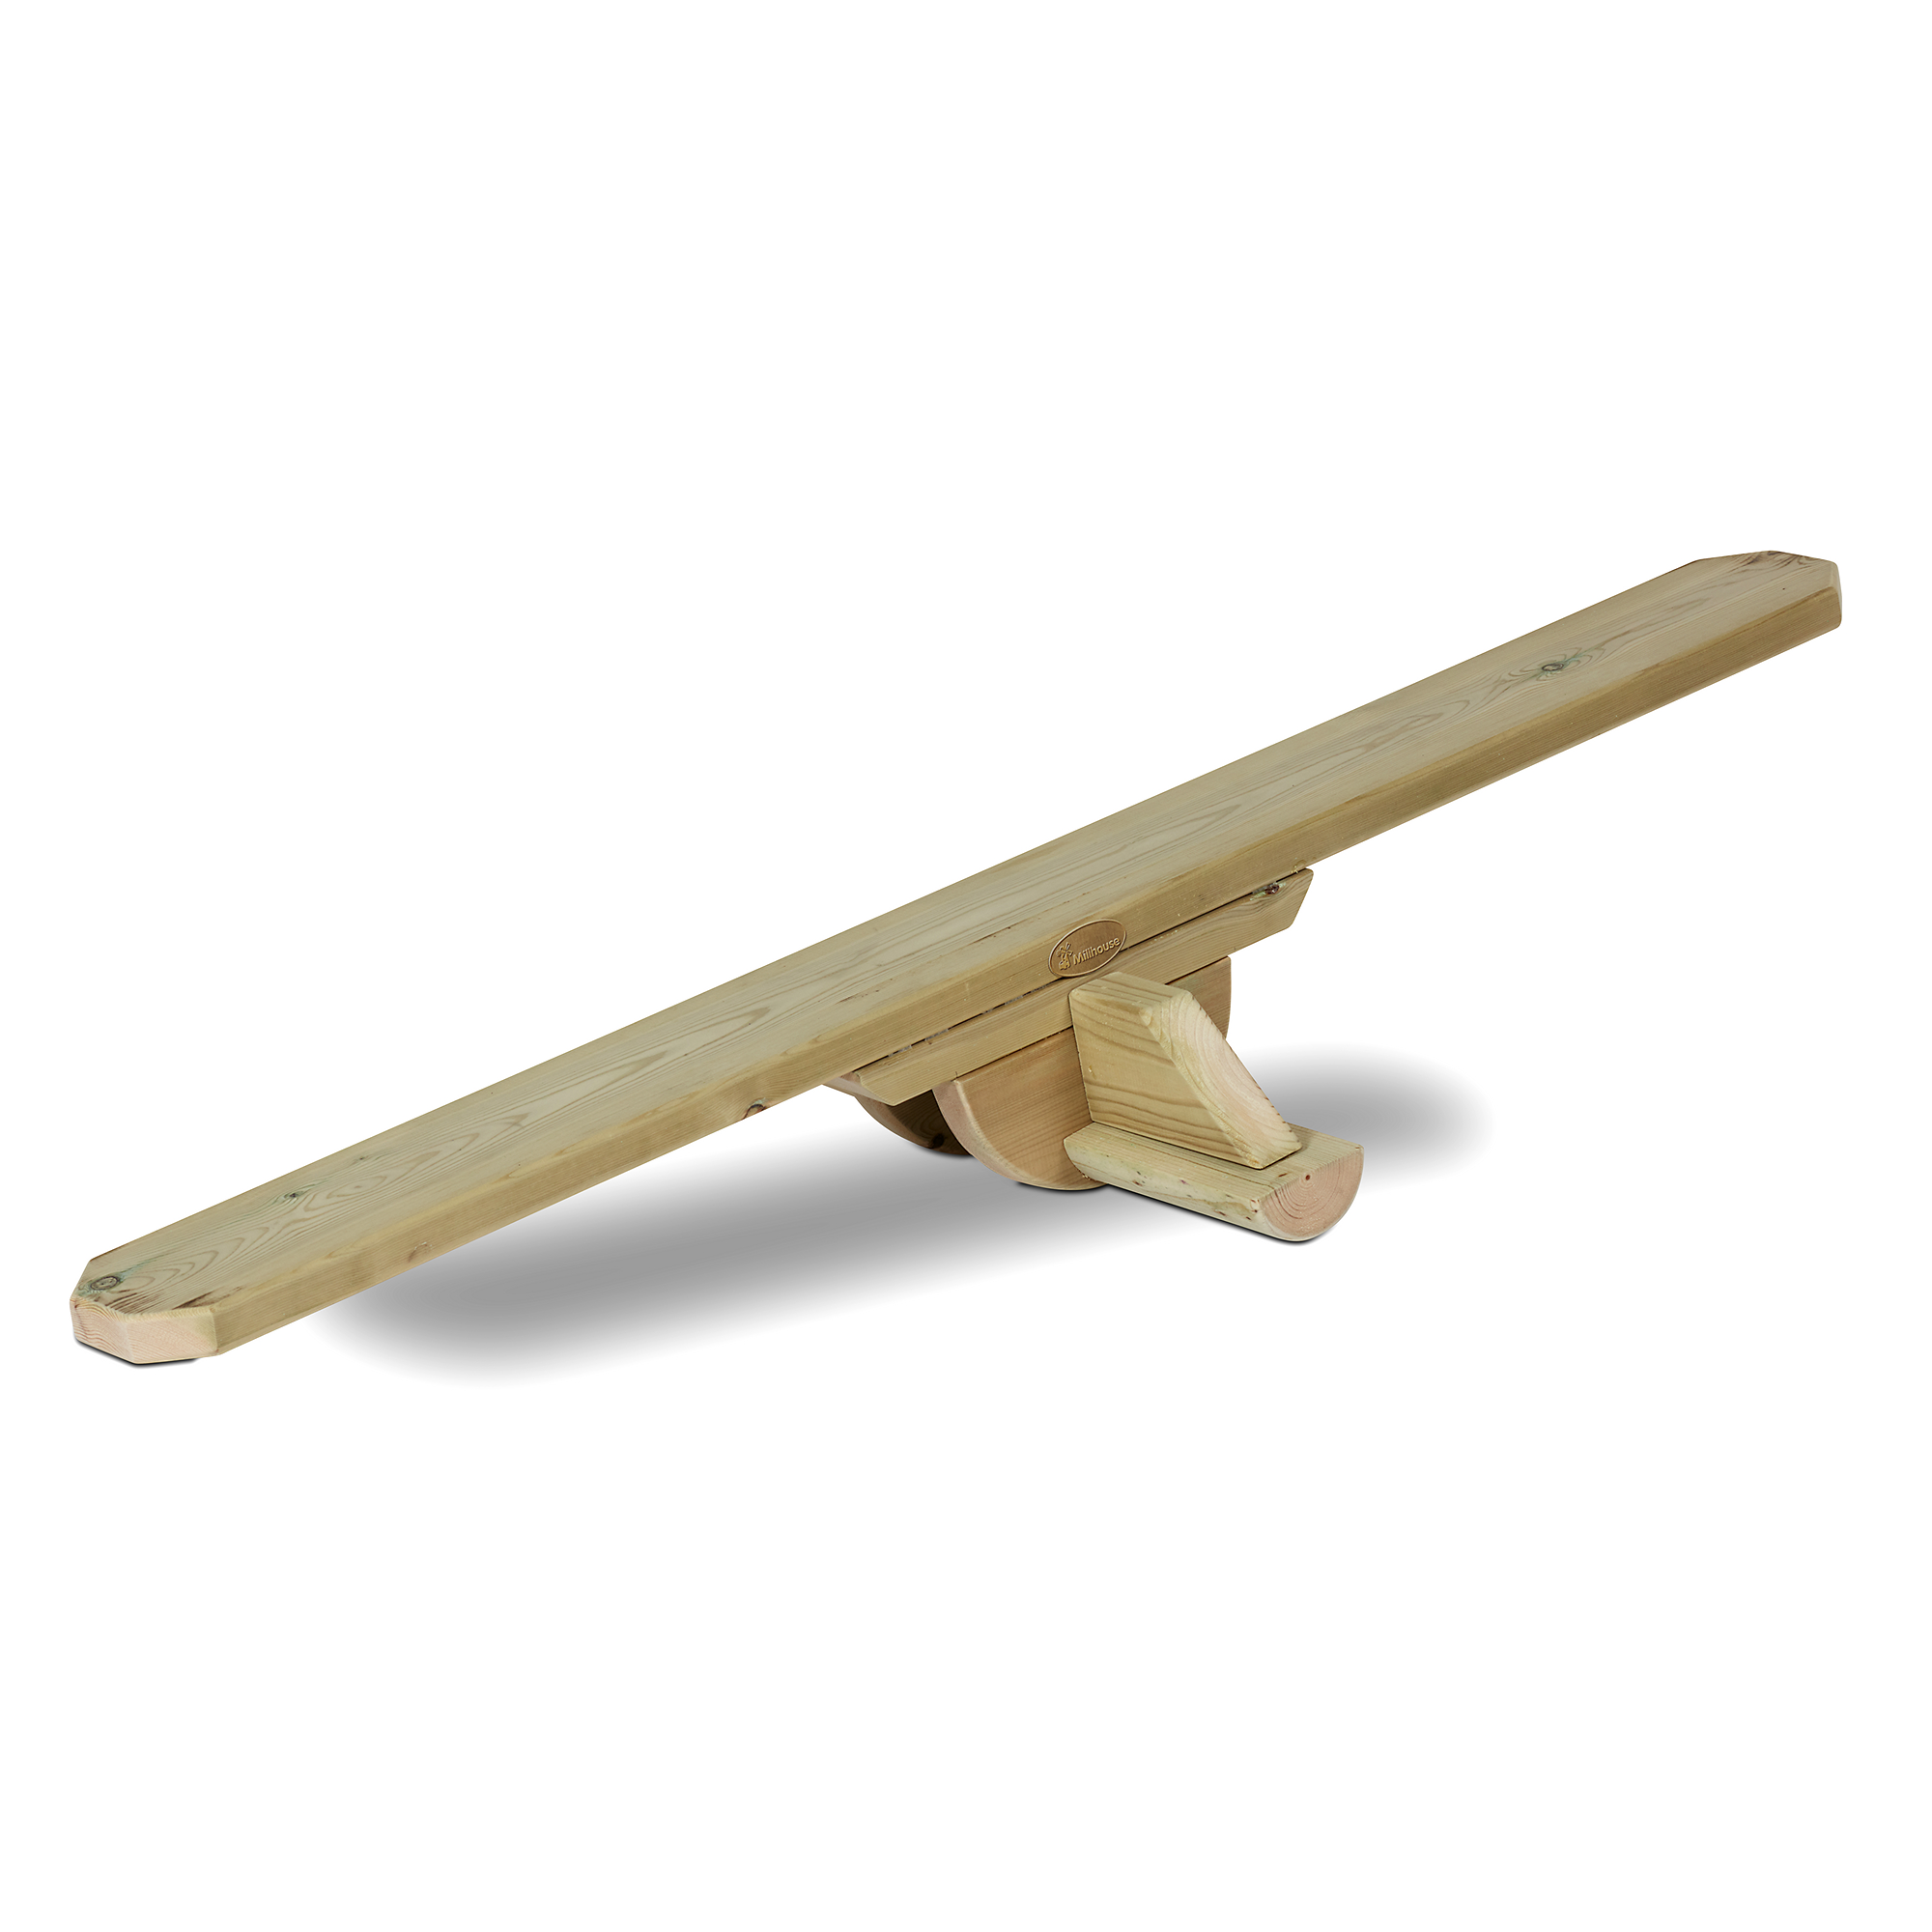 wooden see saw